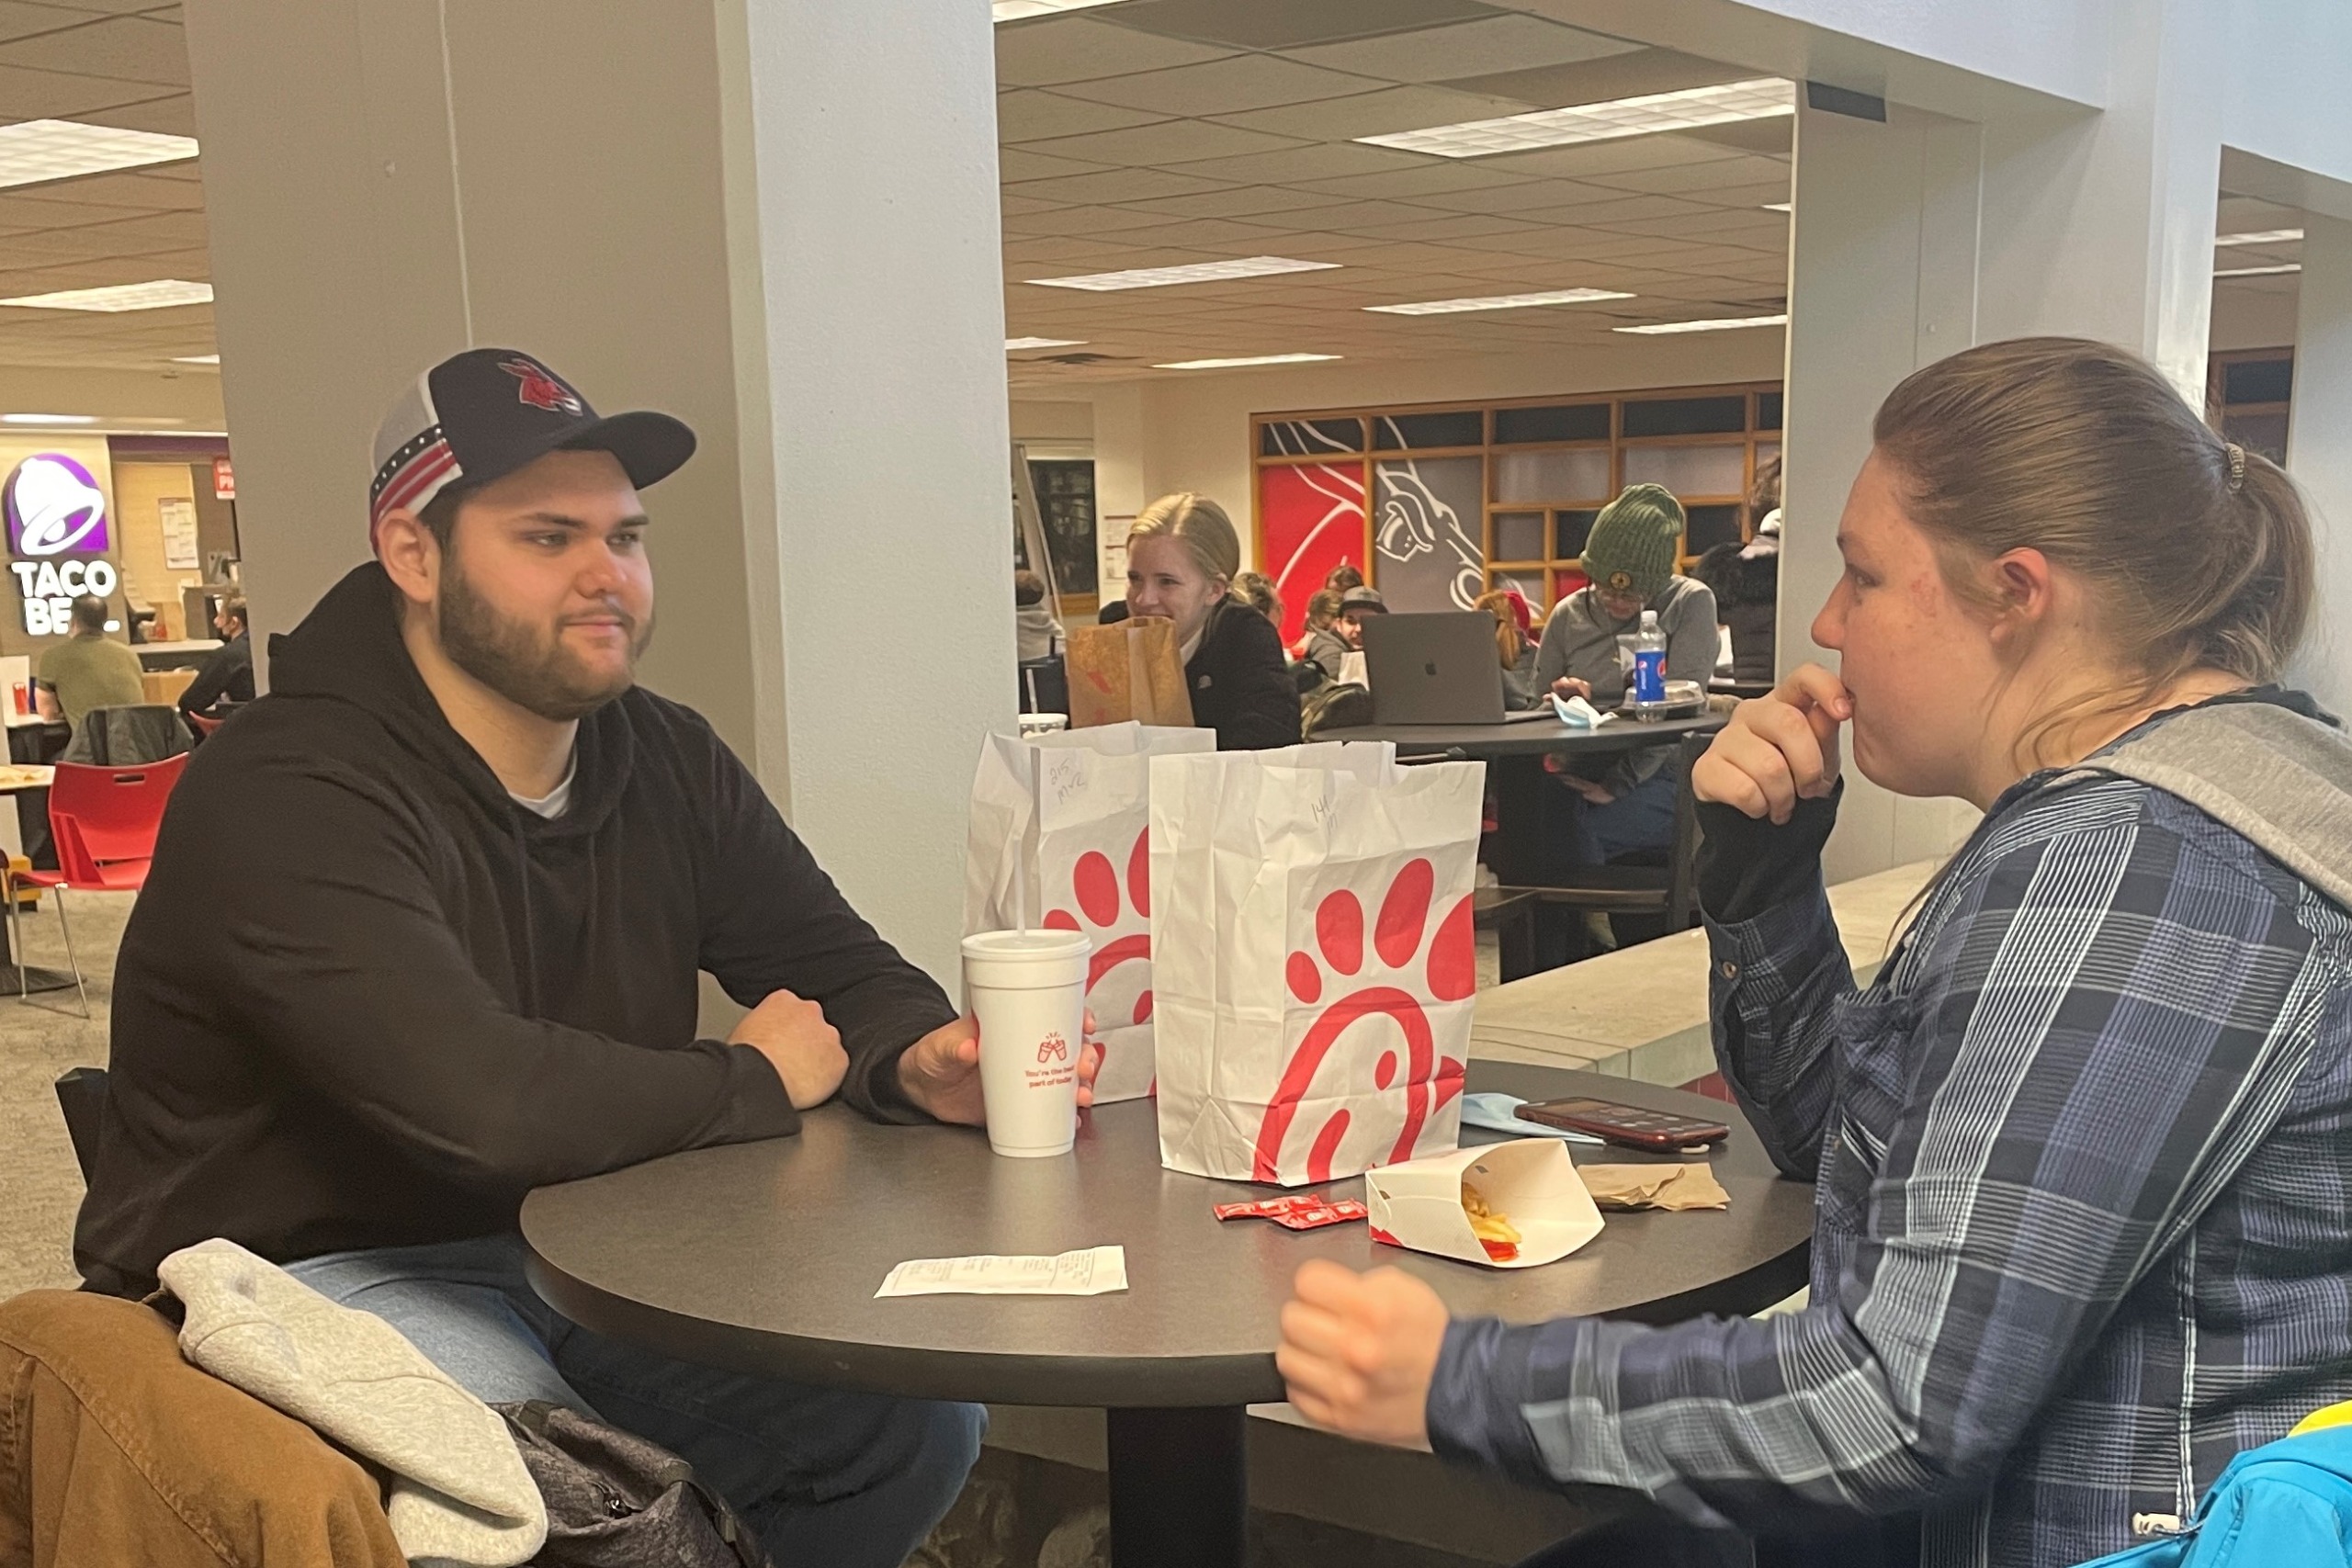 Students eating Chick-fil-A